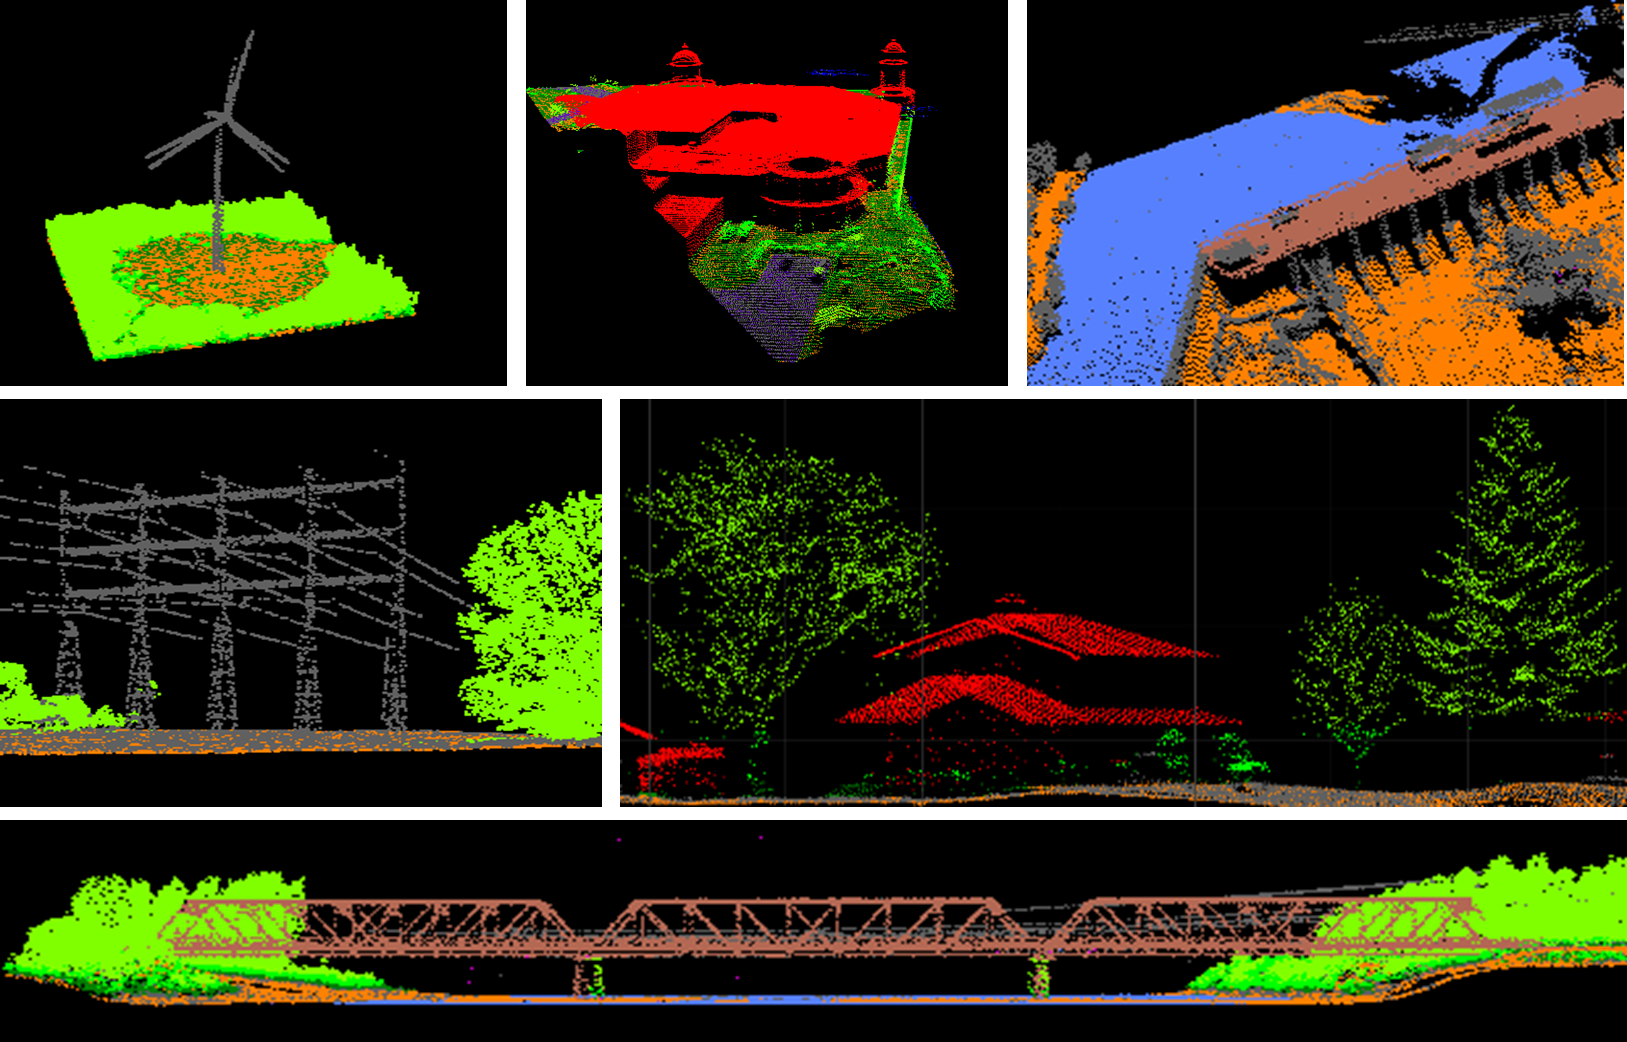 Various LiDAR point clouds showing buildings, energy infrastructure, a bridge and vegetation.